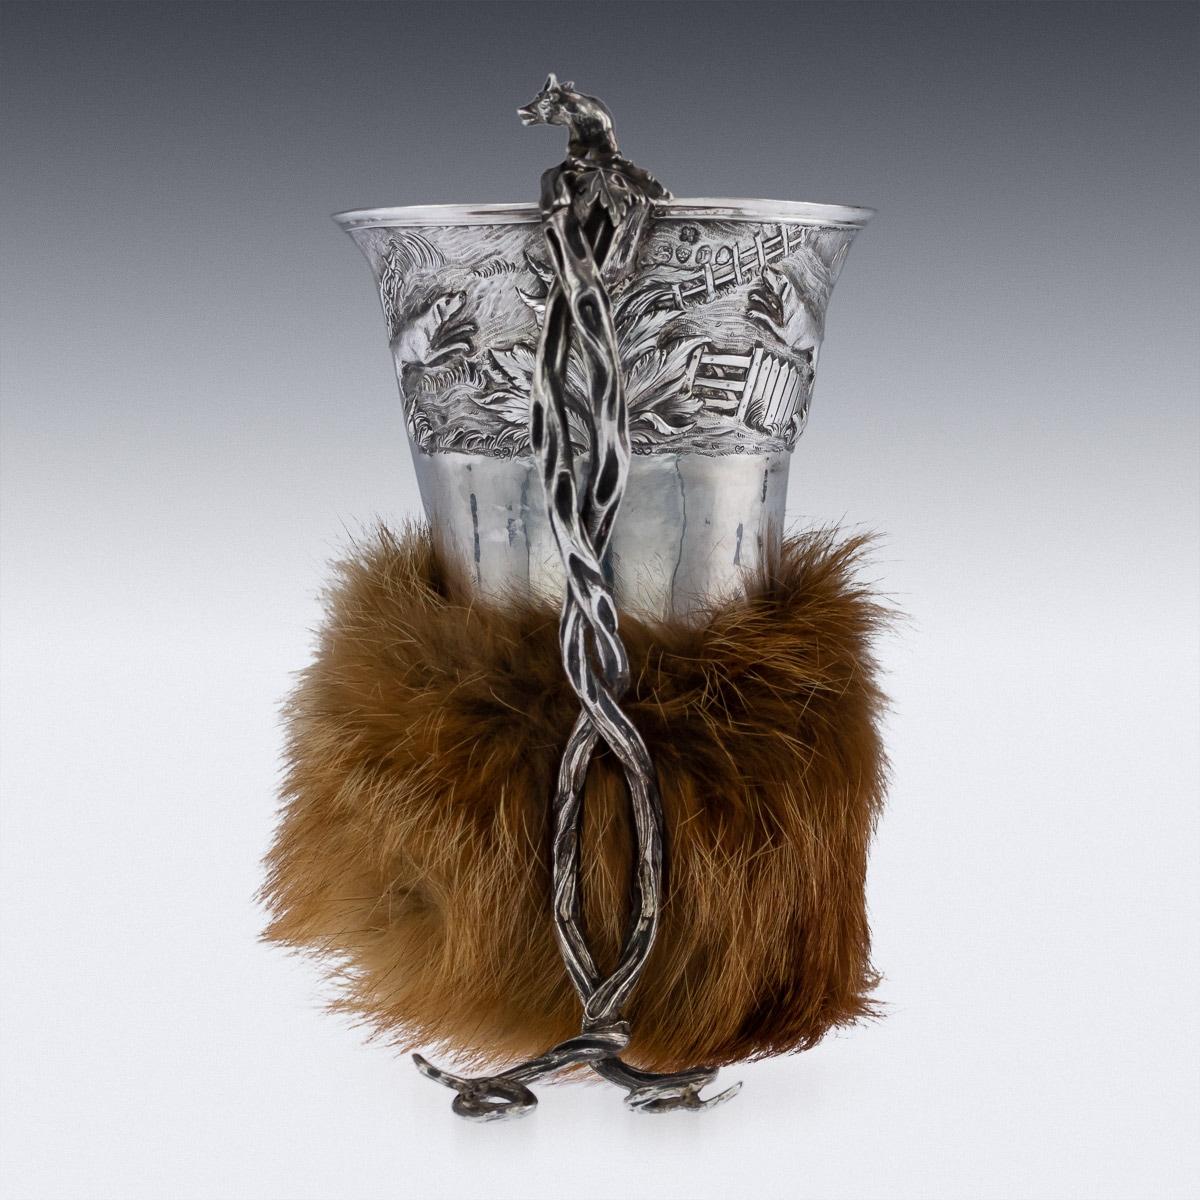 Antique 19th century Georgian solid silver stirrup cup, of very unusual design, the cup is cone shape, resting on twisted vines and mounted with a model of a fox, the top boarder depicting hunting dogs in a country landscape chasing a fox, large